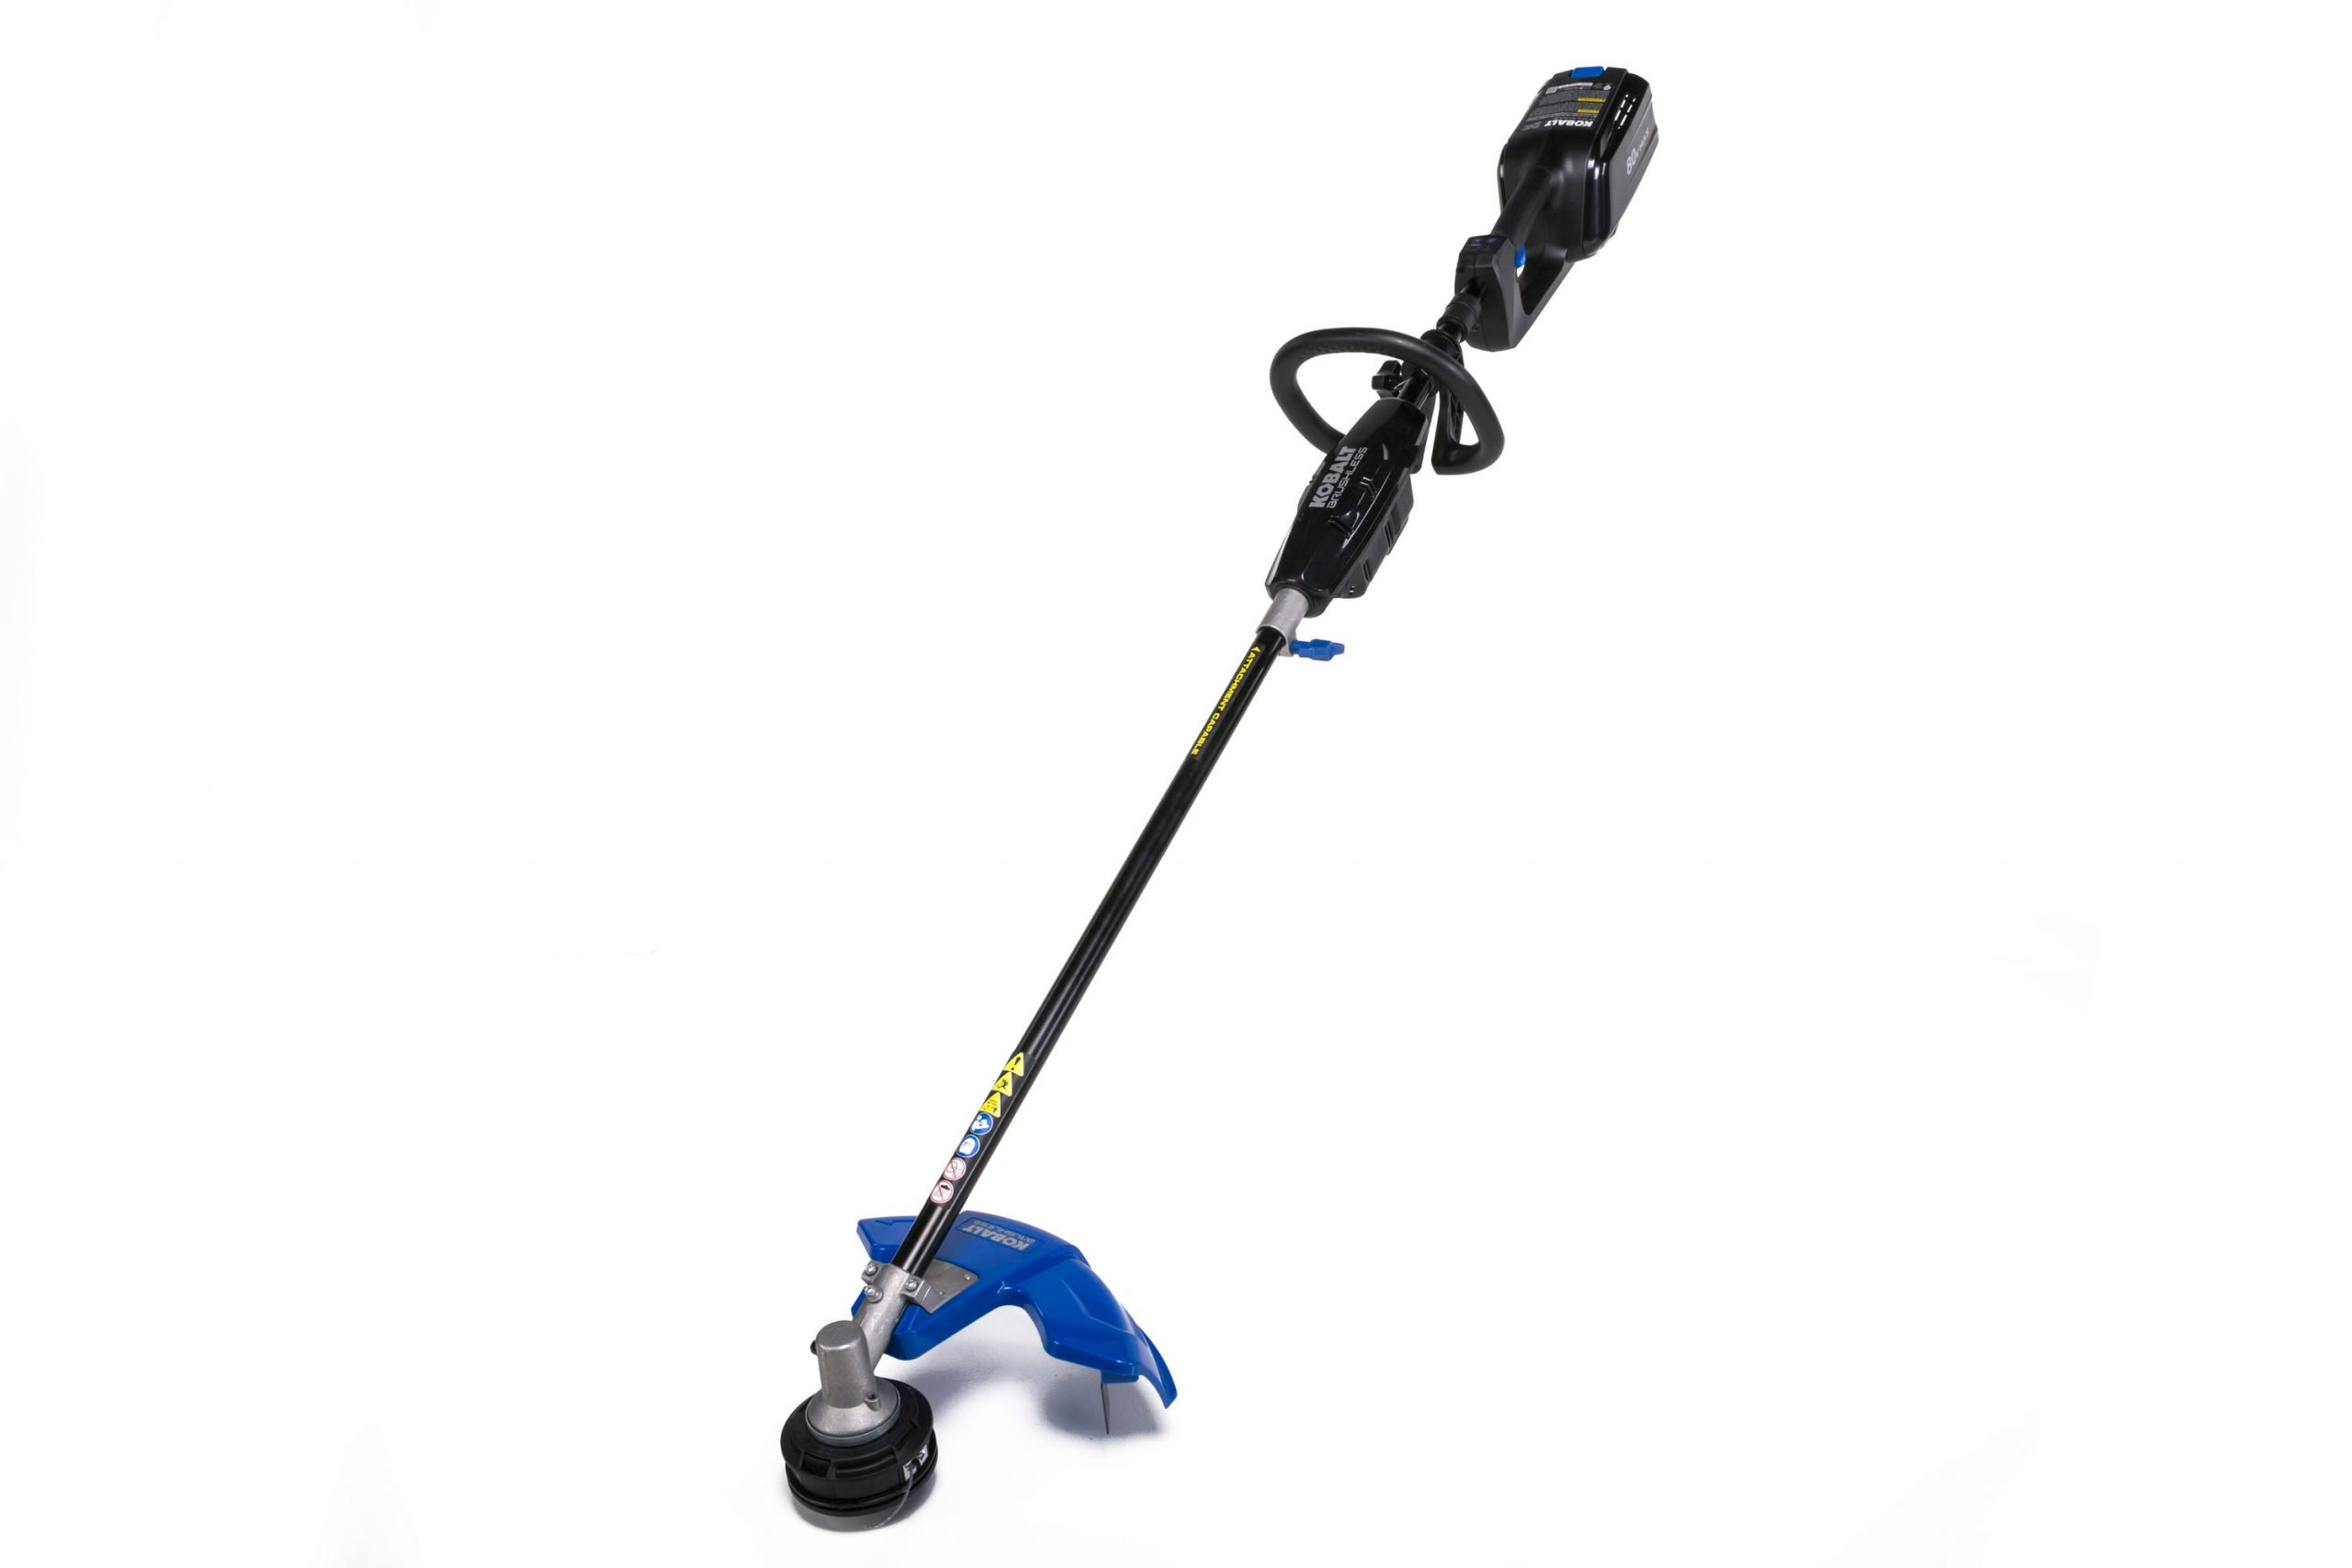 https://discounttoday.net/wp-content/uploads/2022/09/Kobalt-KST-140XB-80-volt-Max-16-in-Straight-Cordless-String-Trimmer-with-Attachment-Capable-Tool-Only-scaled.jpg